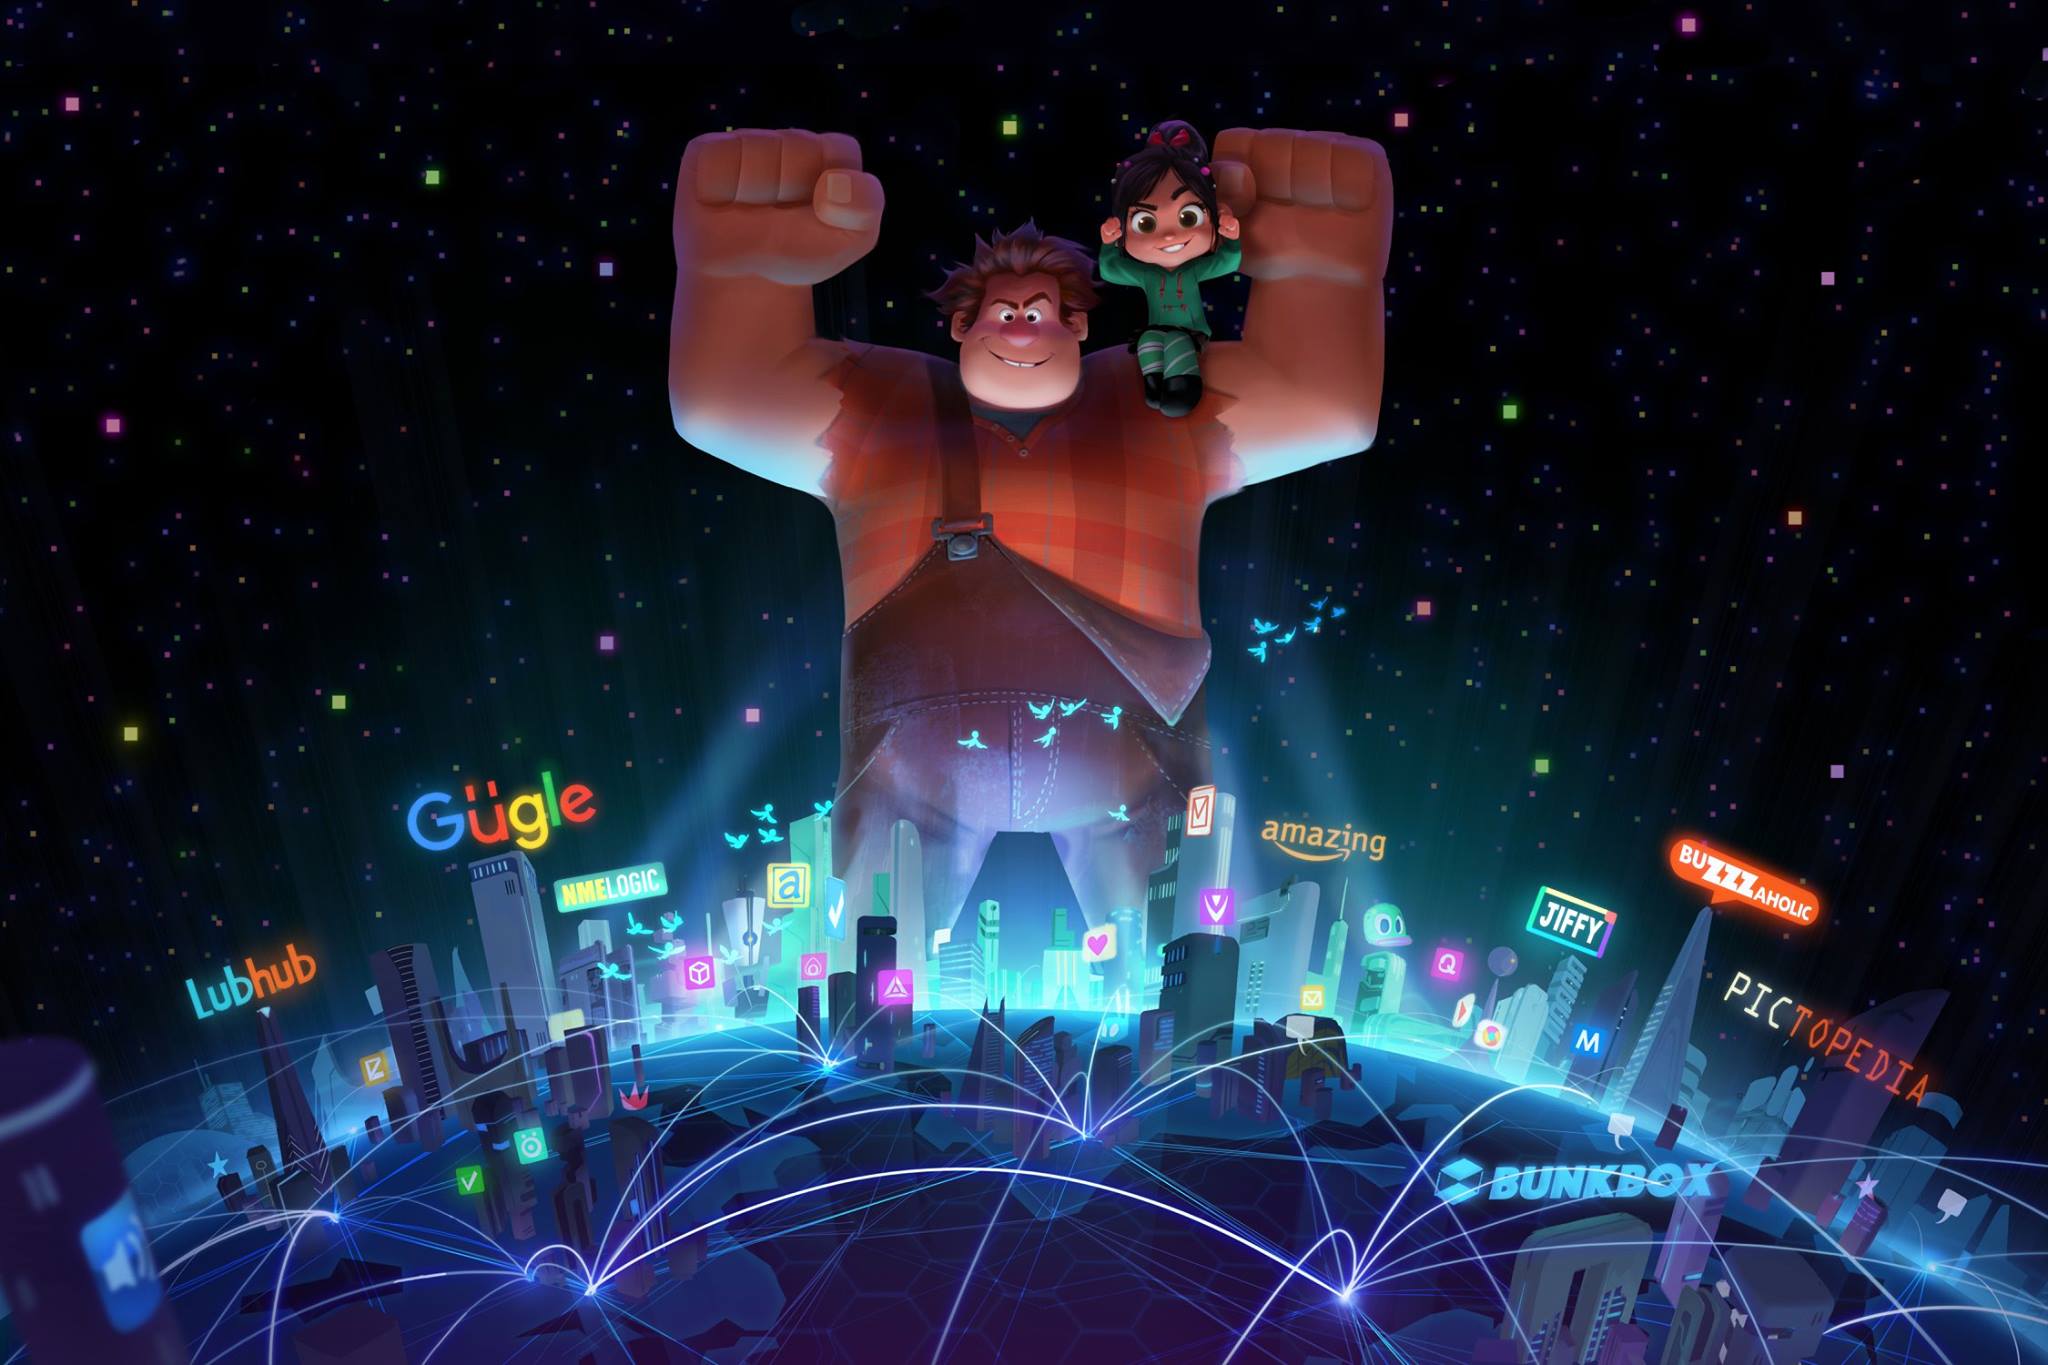 Wreck It Ralph 2 Officially Announced By Disney